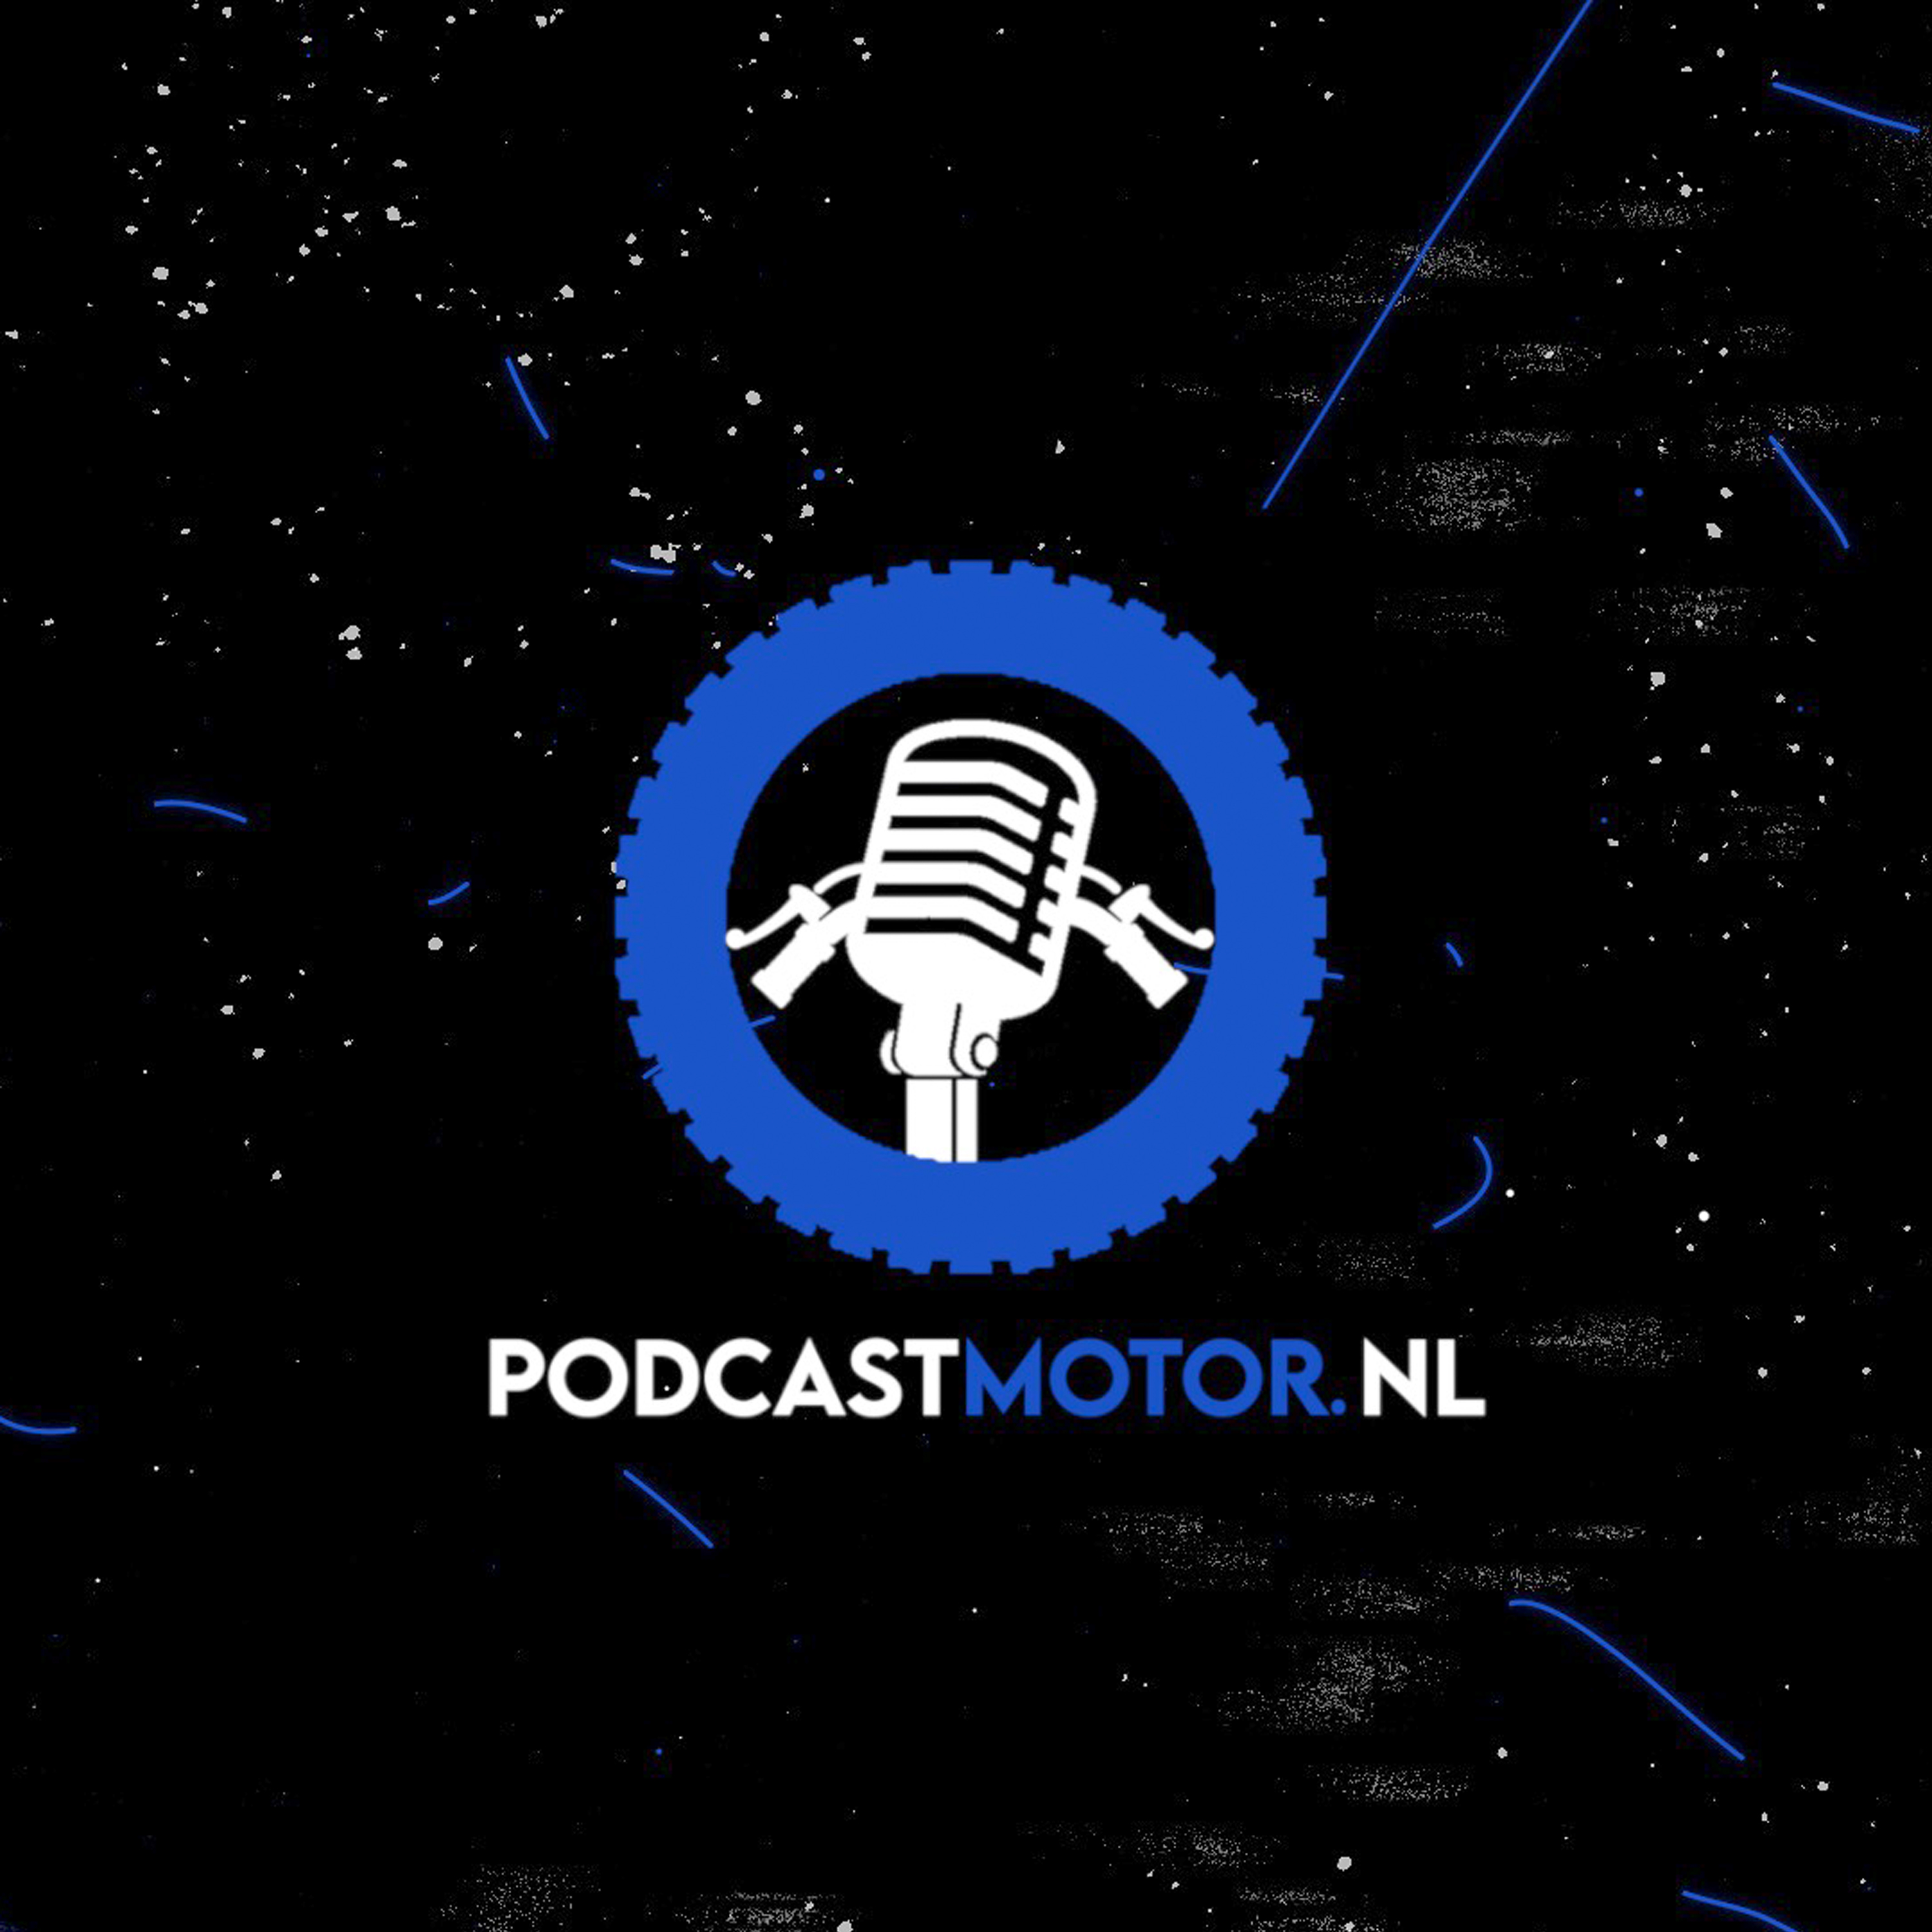 PodcastMotor